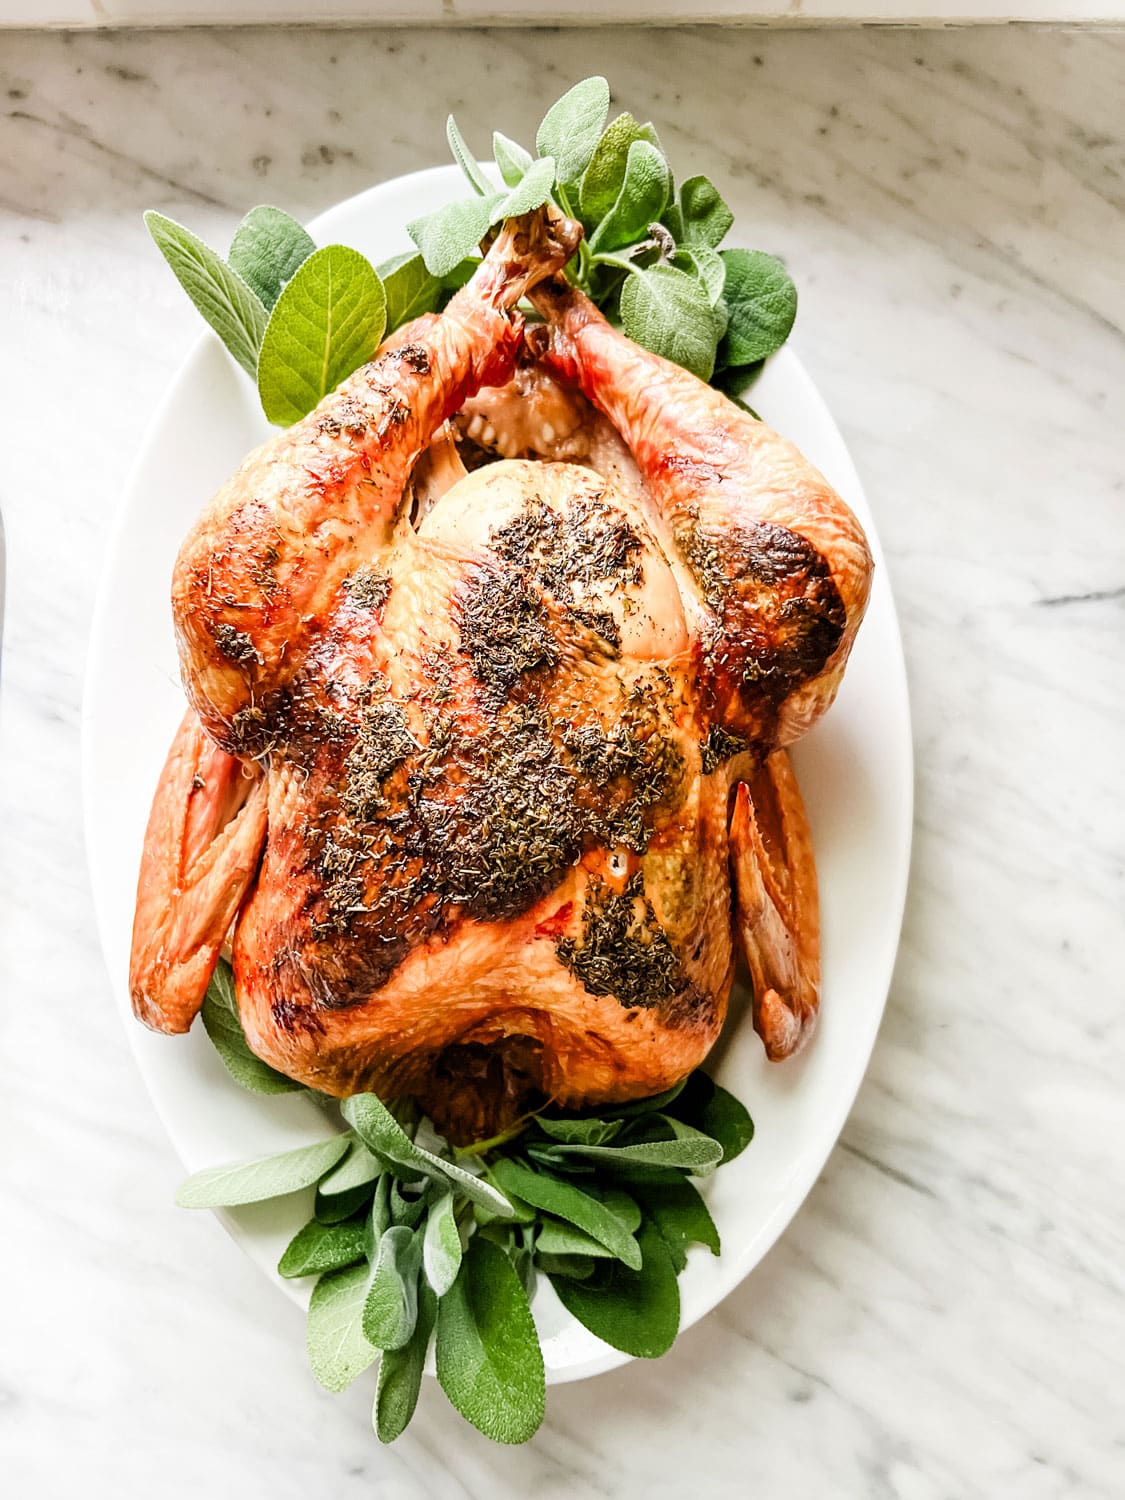 The 10 Best Basters To Avoid A Dry Thanksgiving Turkey